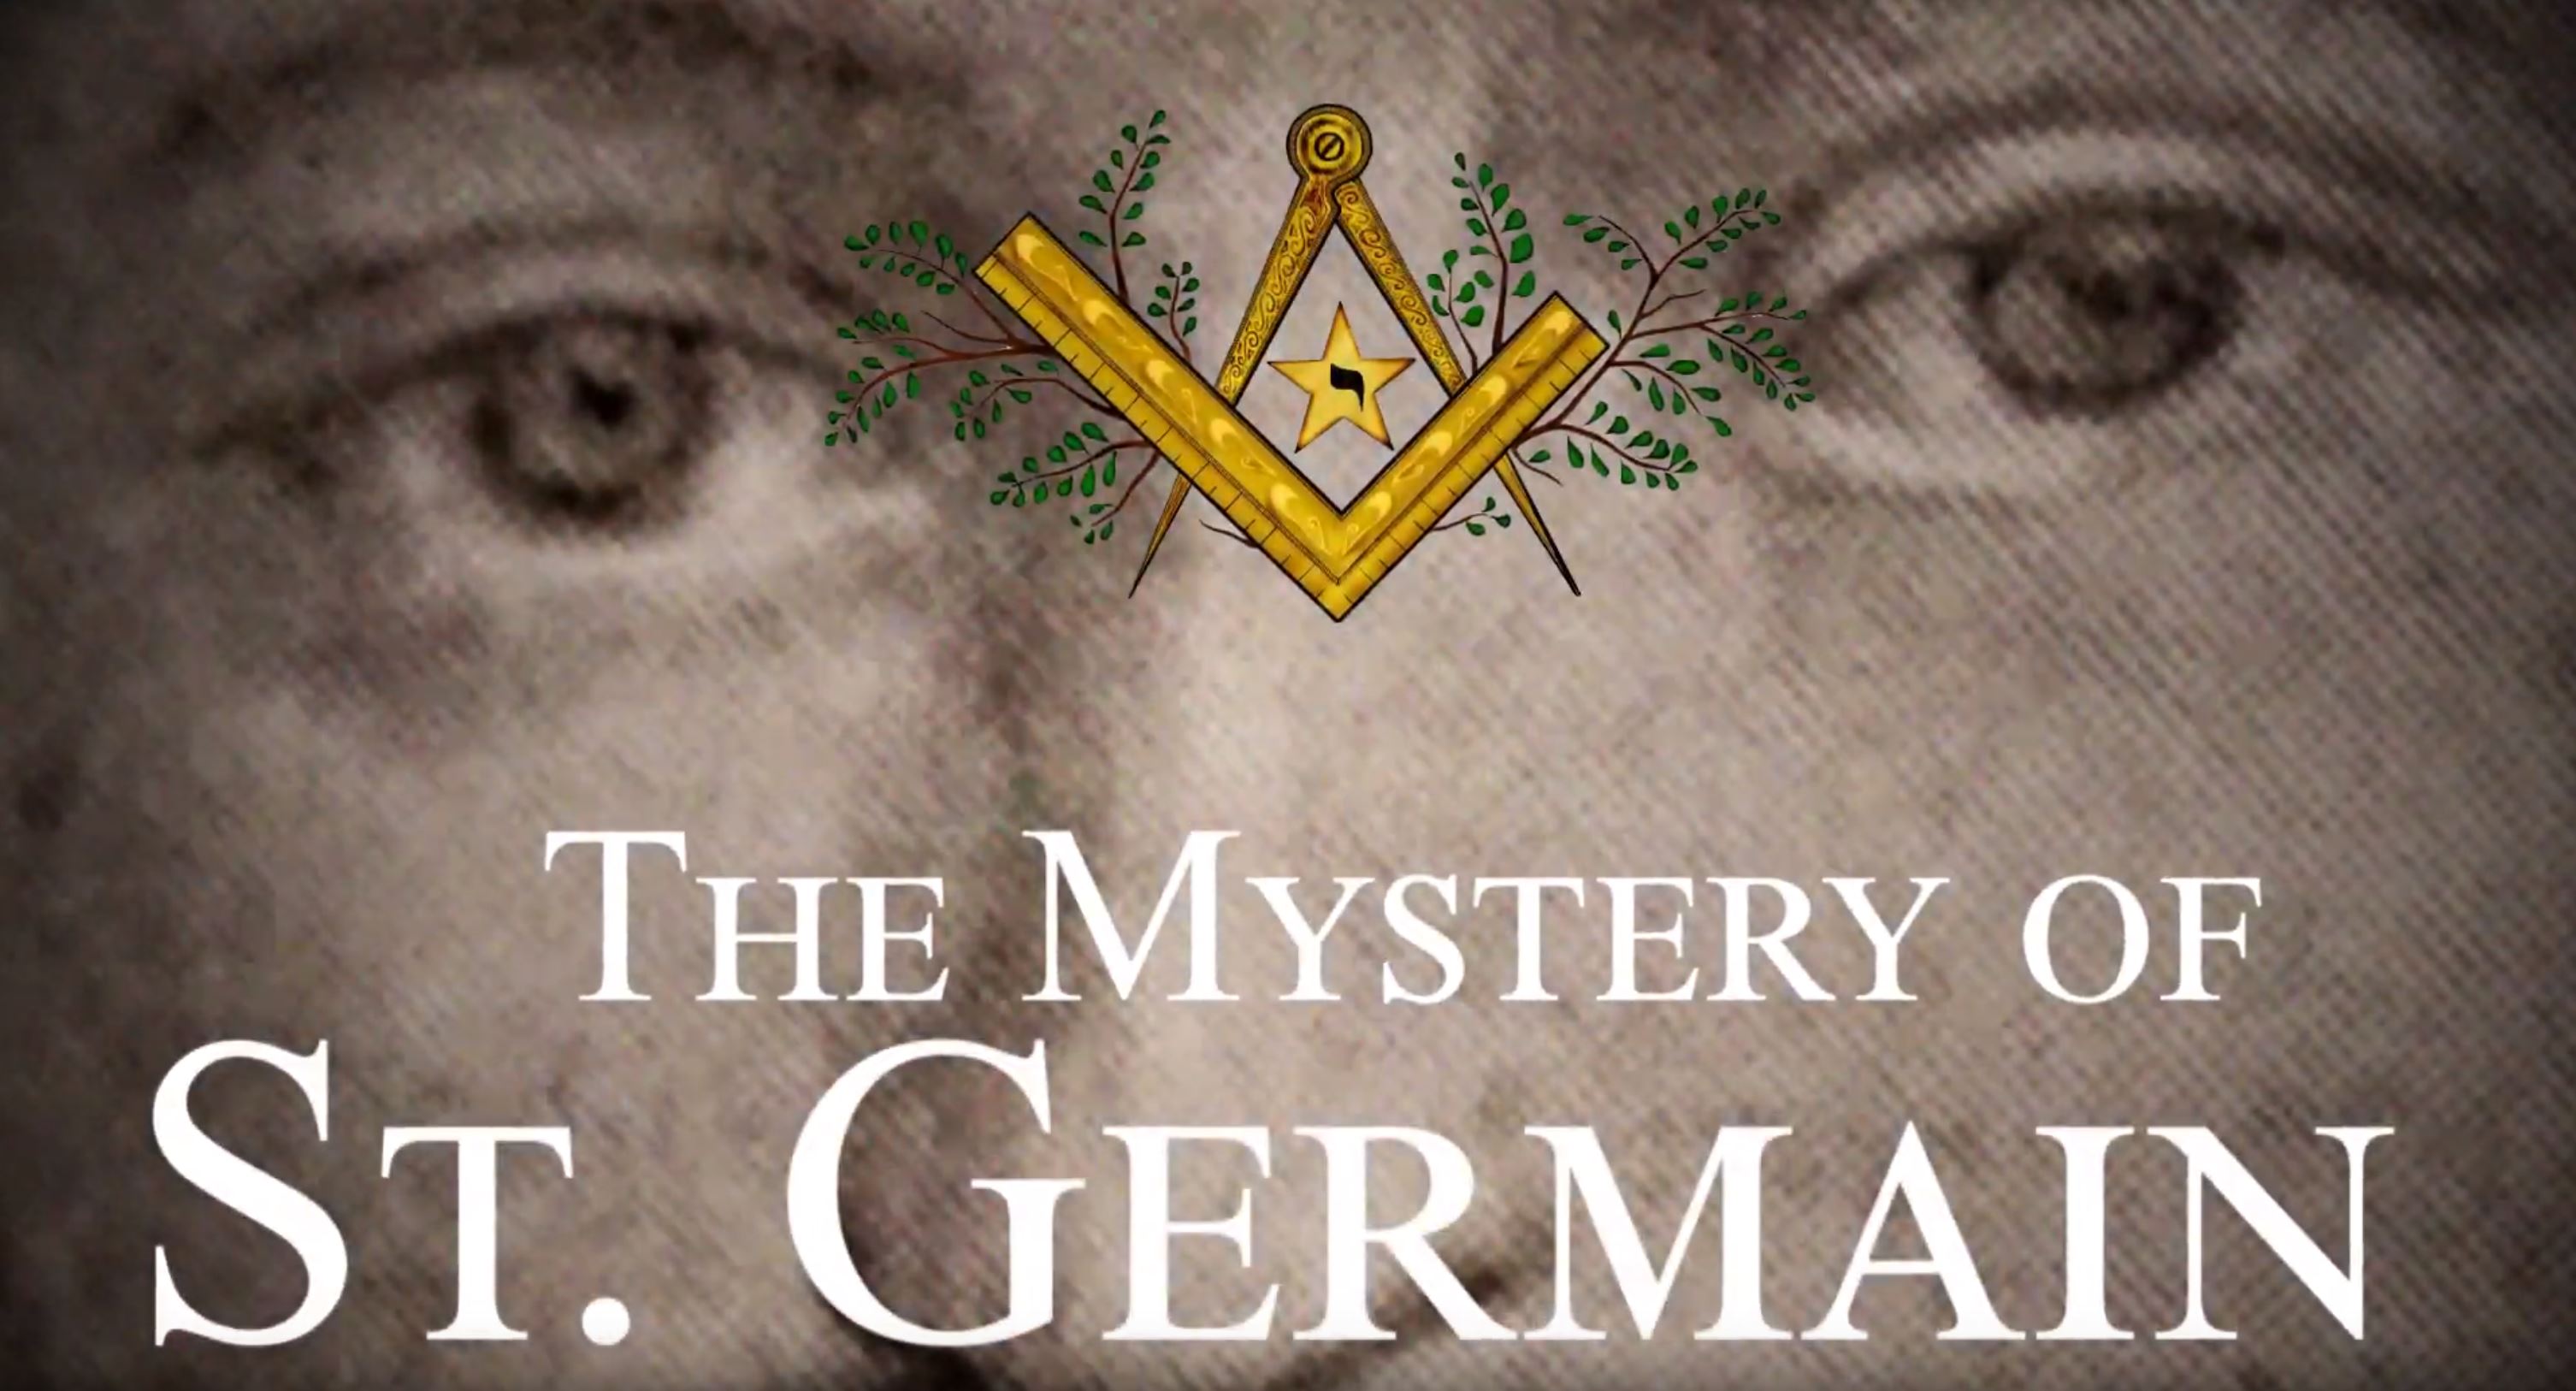 The mystery of St. Germain